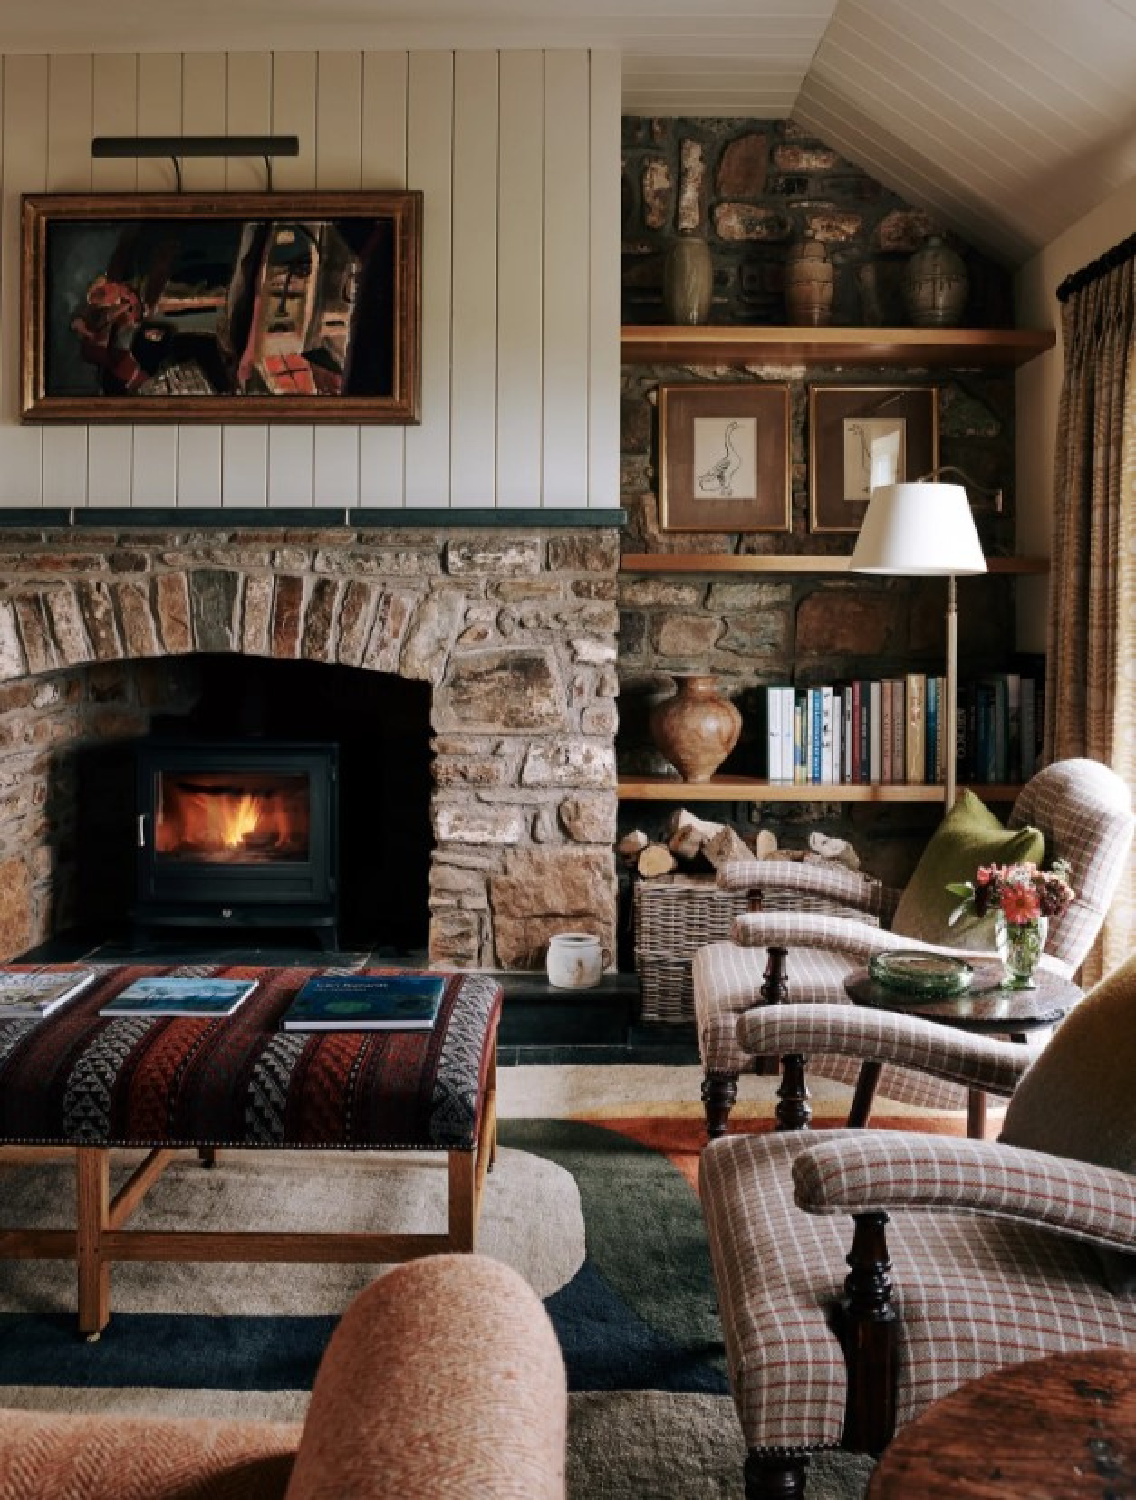 Pembrokeshire cottage with snug room - photo: Michael Sinclair for House & Garden UK. #englishcountry #snugrooms